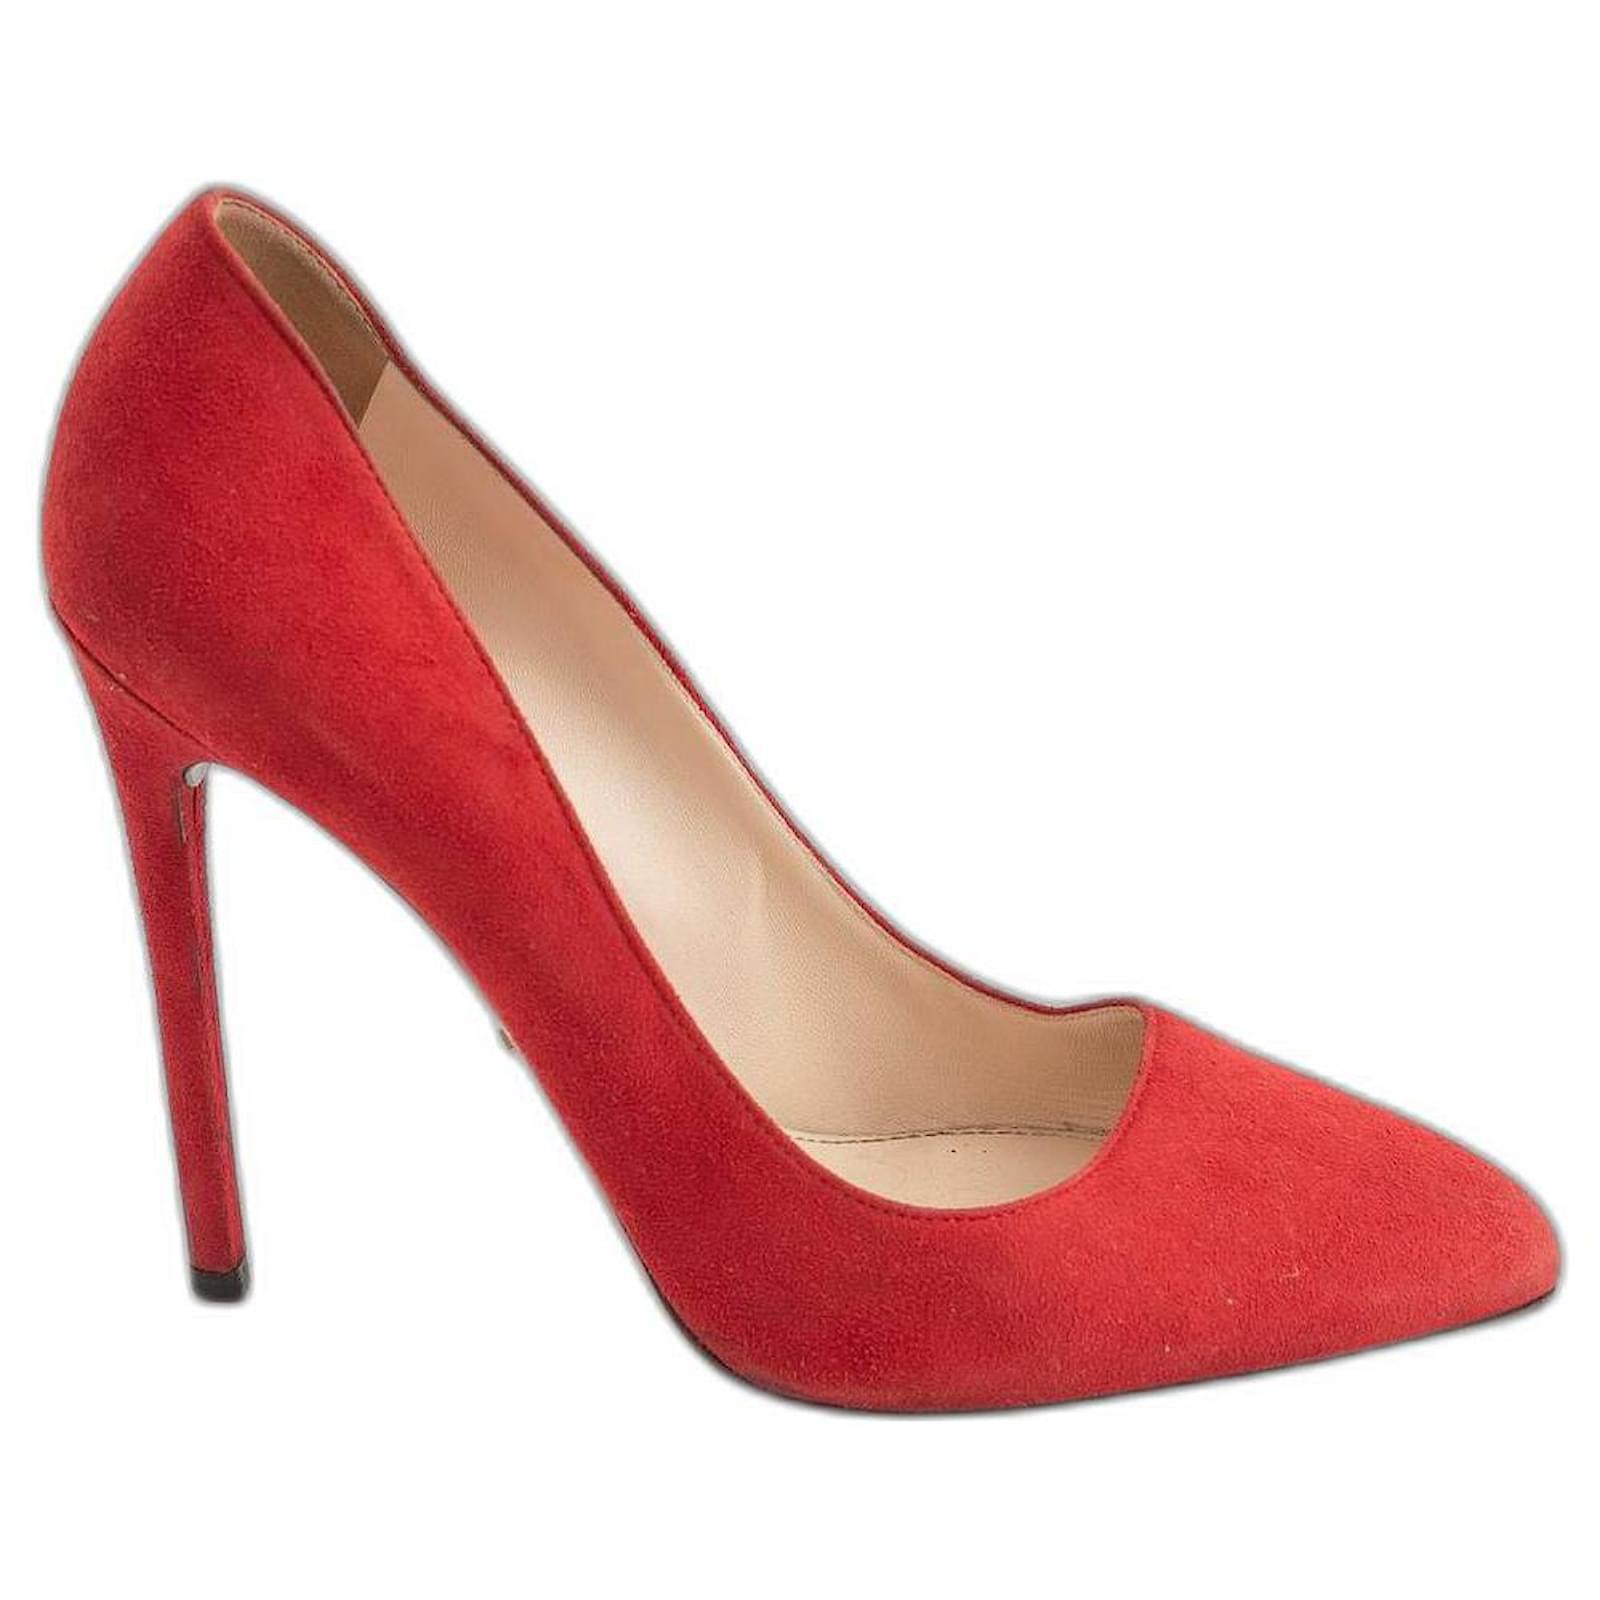 Total 61+ imagen prada shoes red - Abzlocal.mx